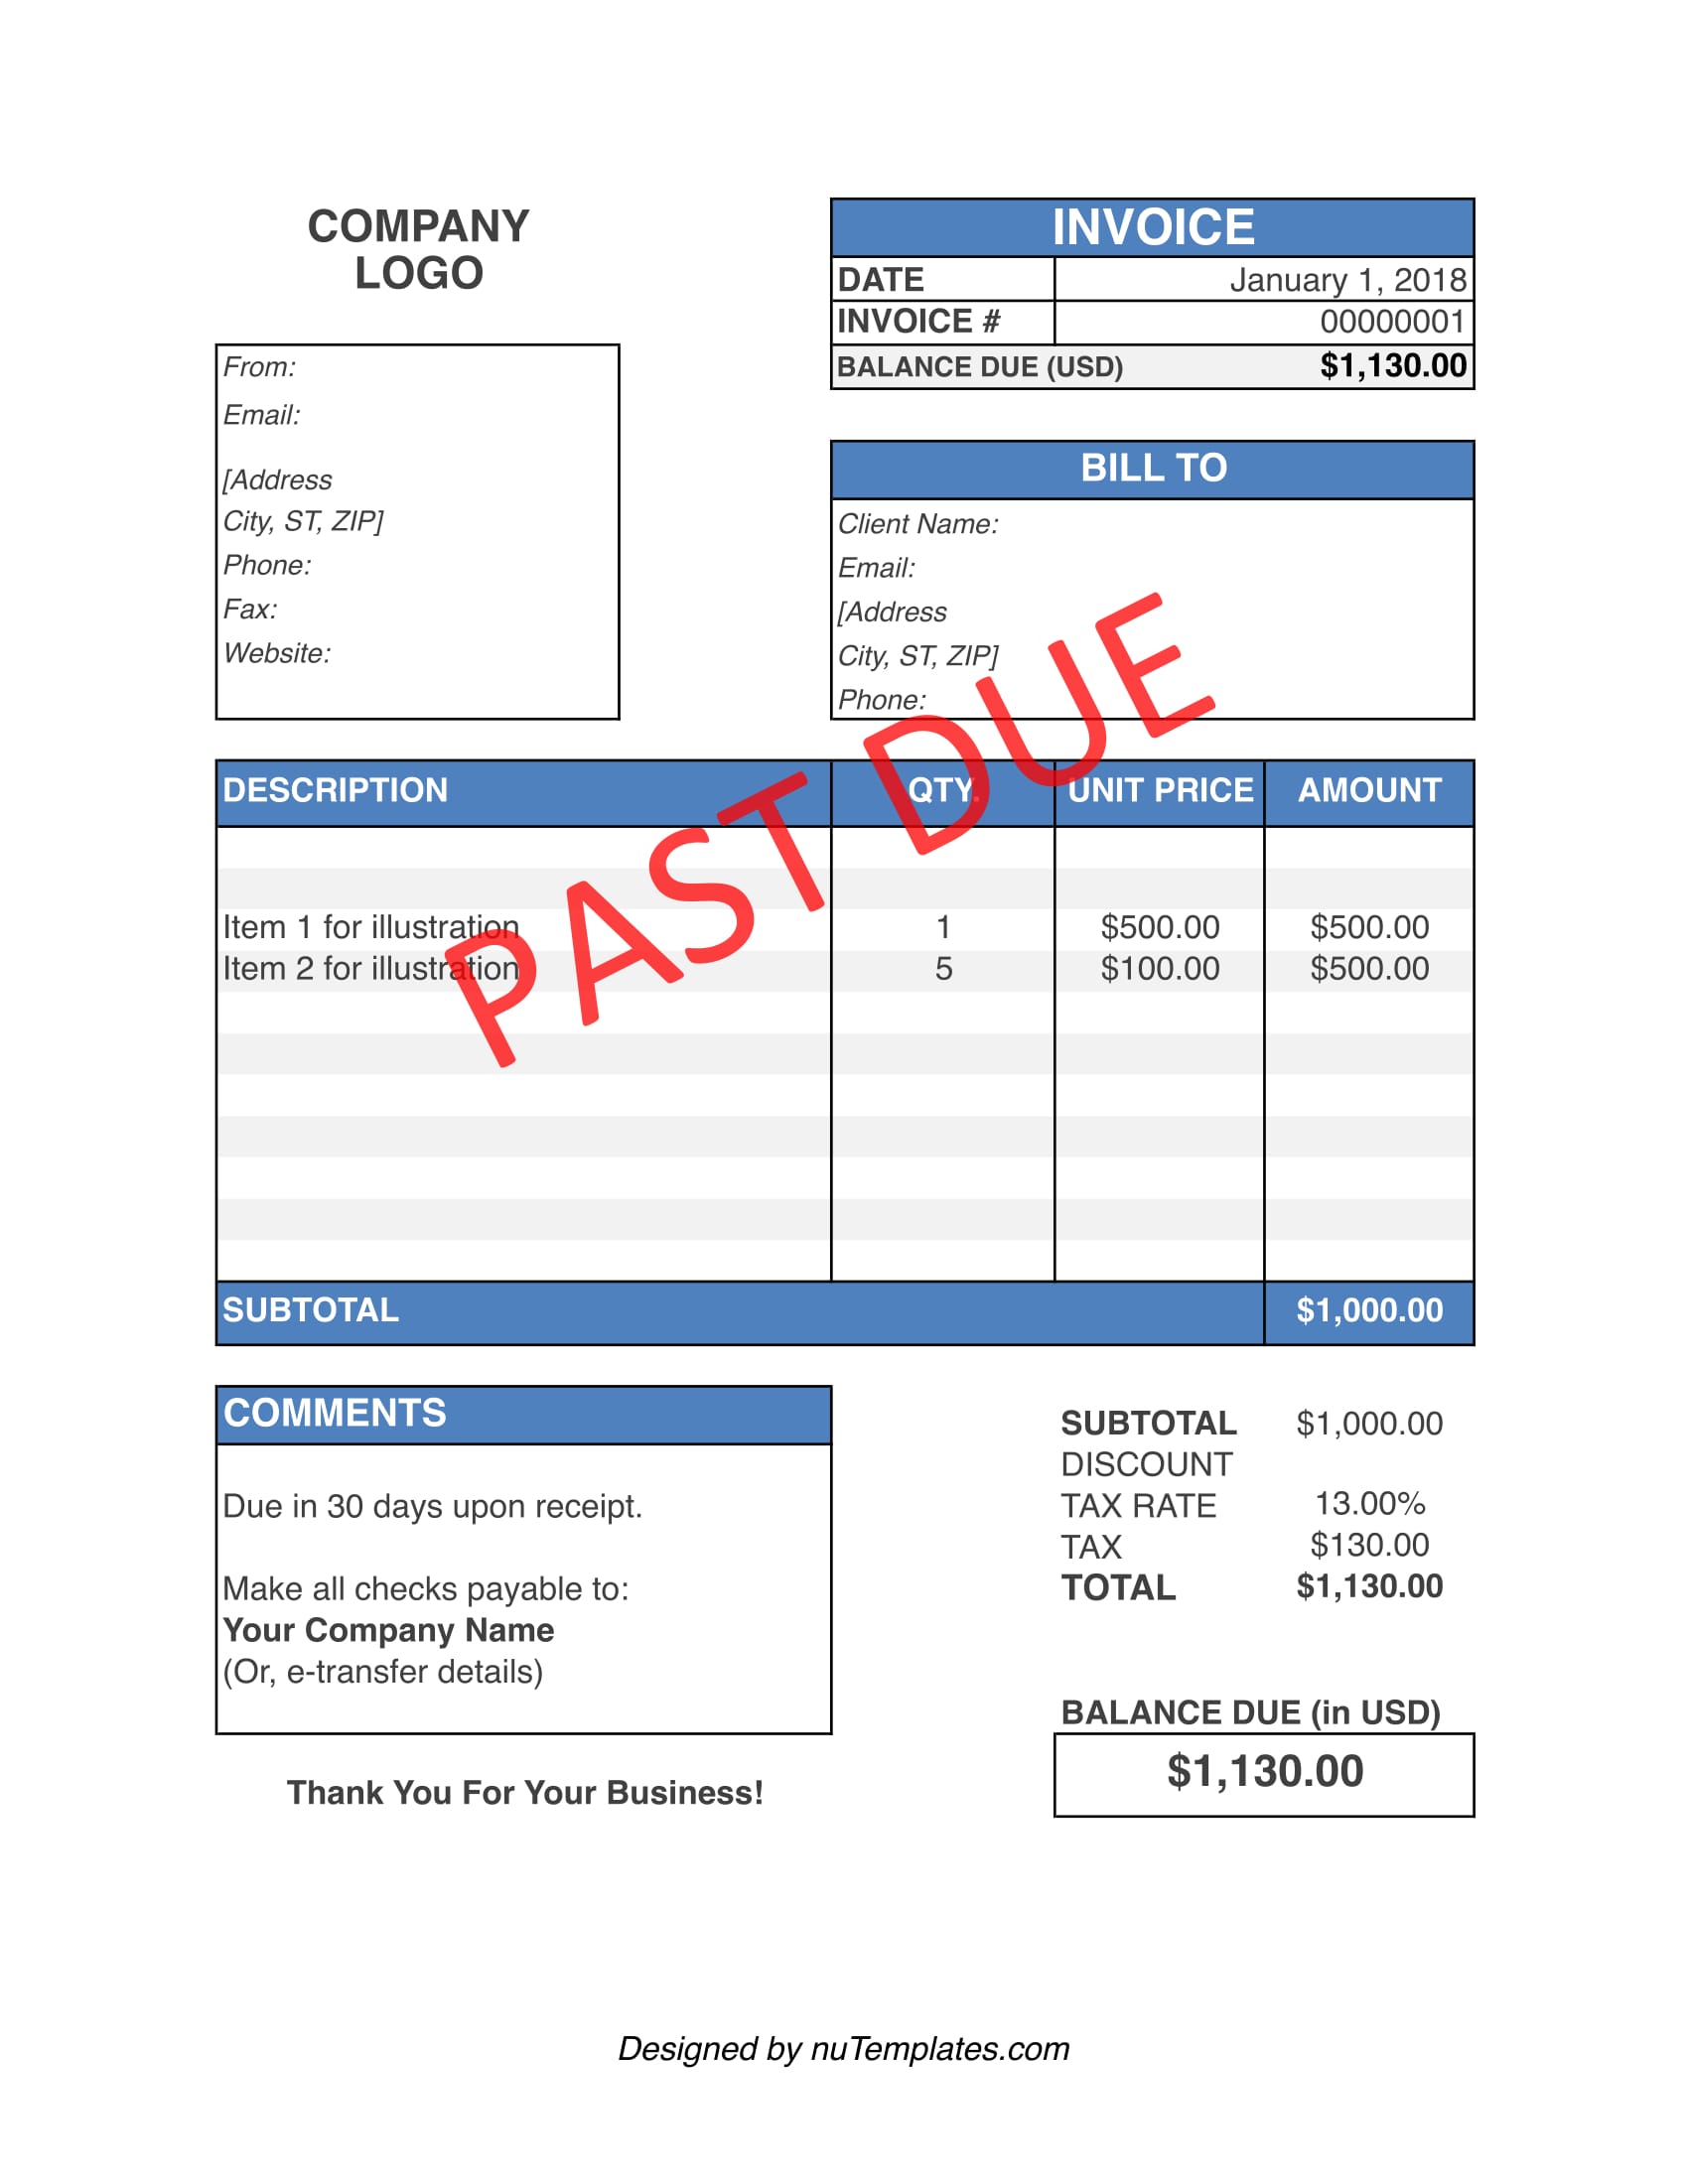 overdue-past-due-invoice-template